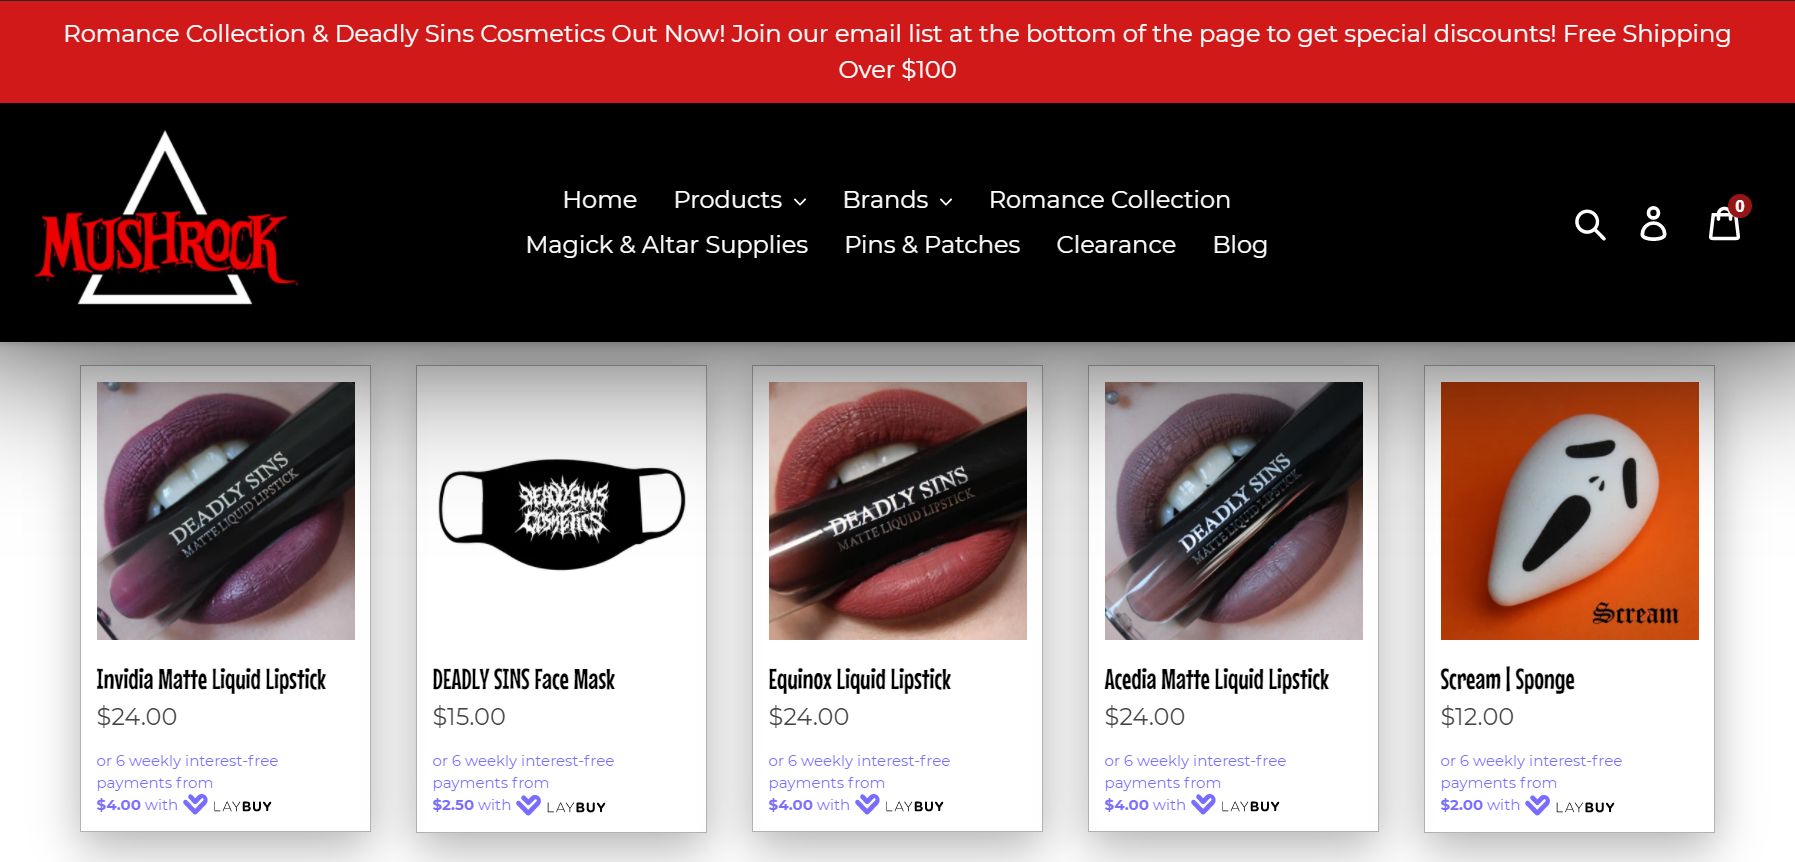 Deadly Sins Cosmetics now available on Mushrock!